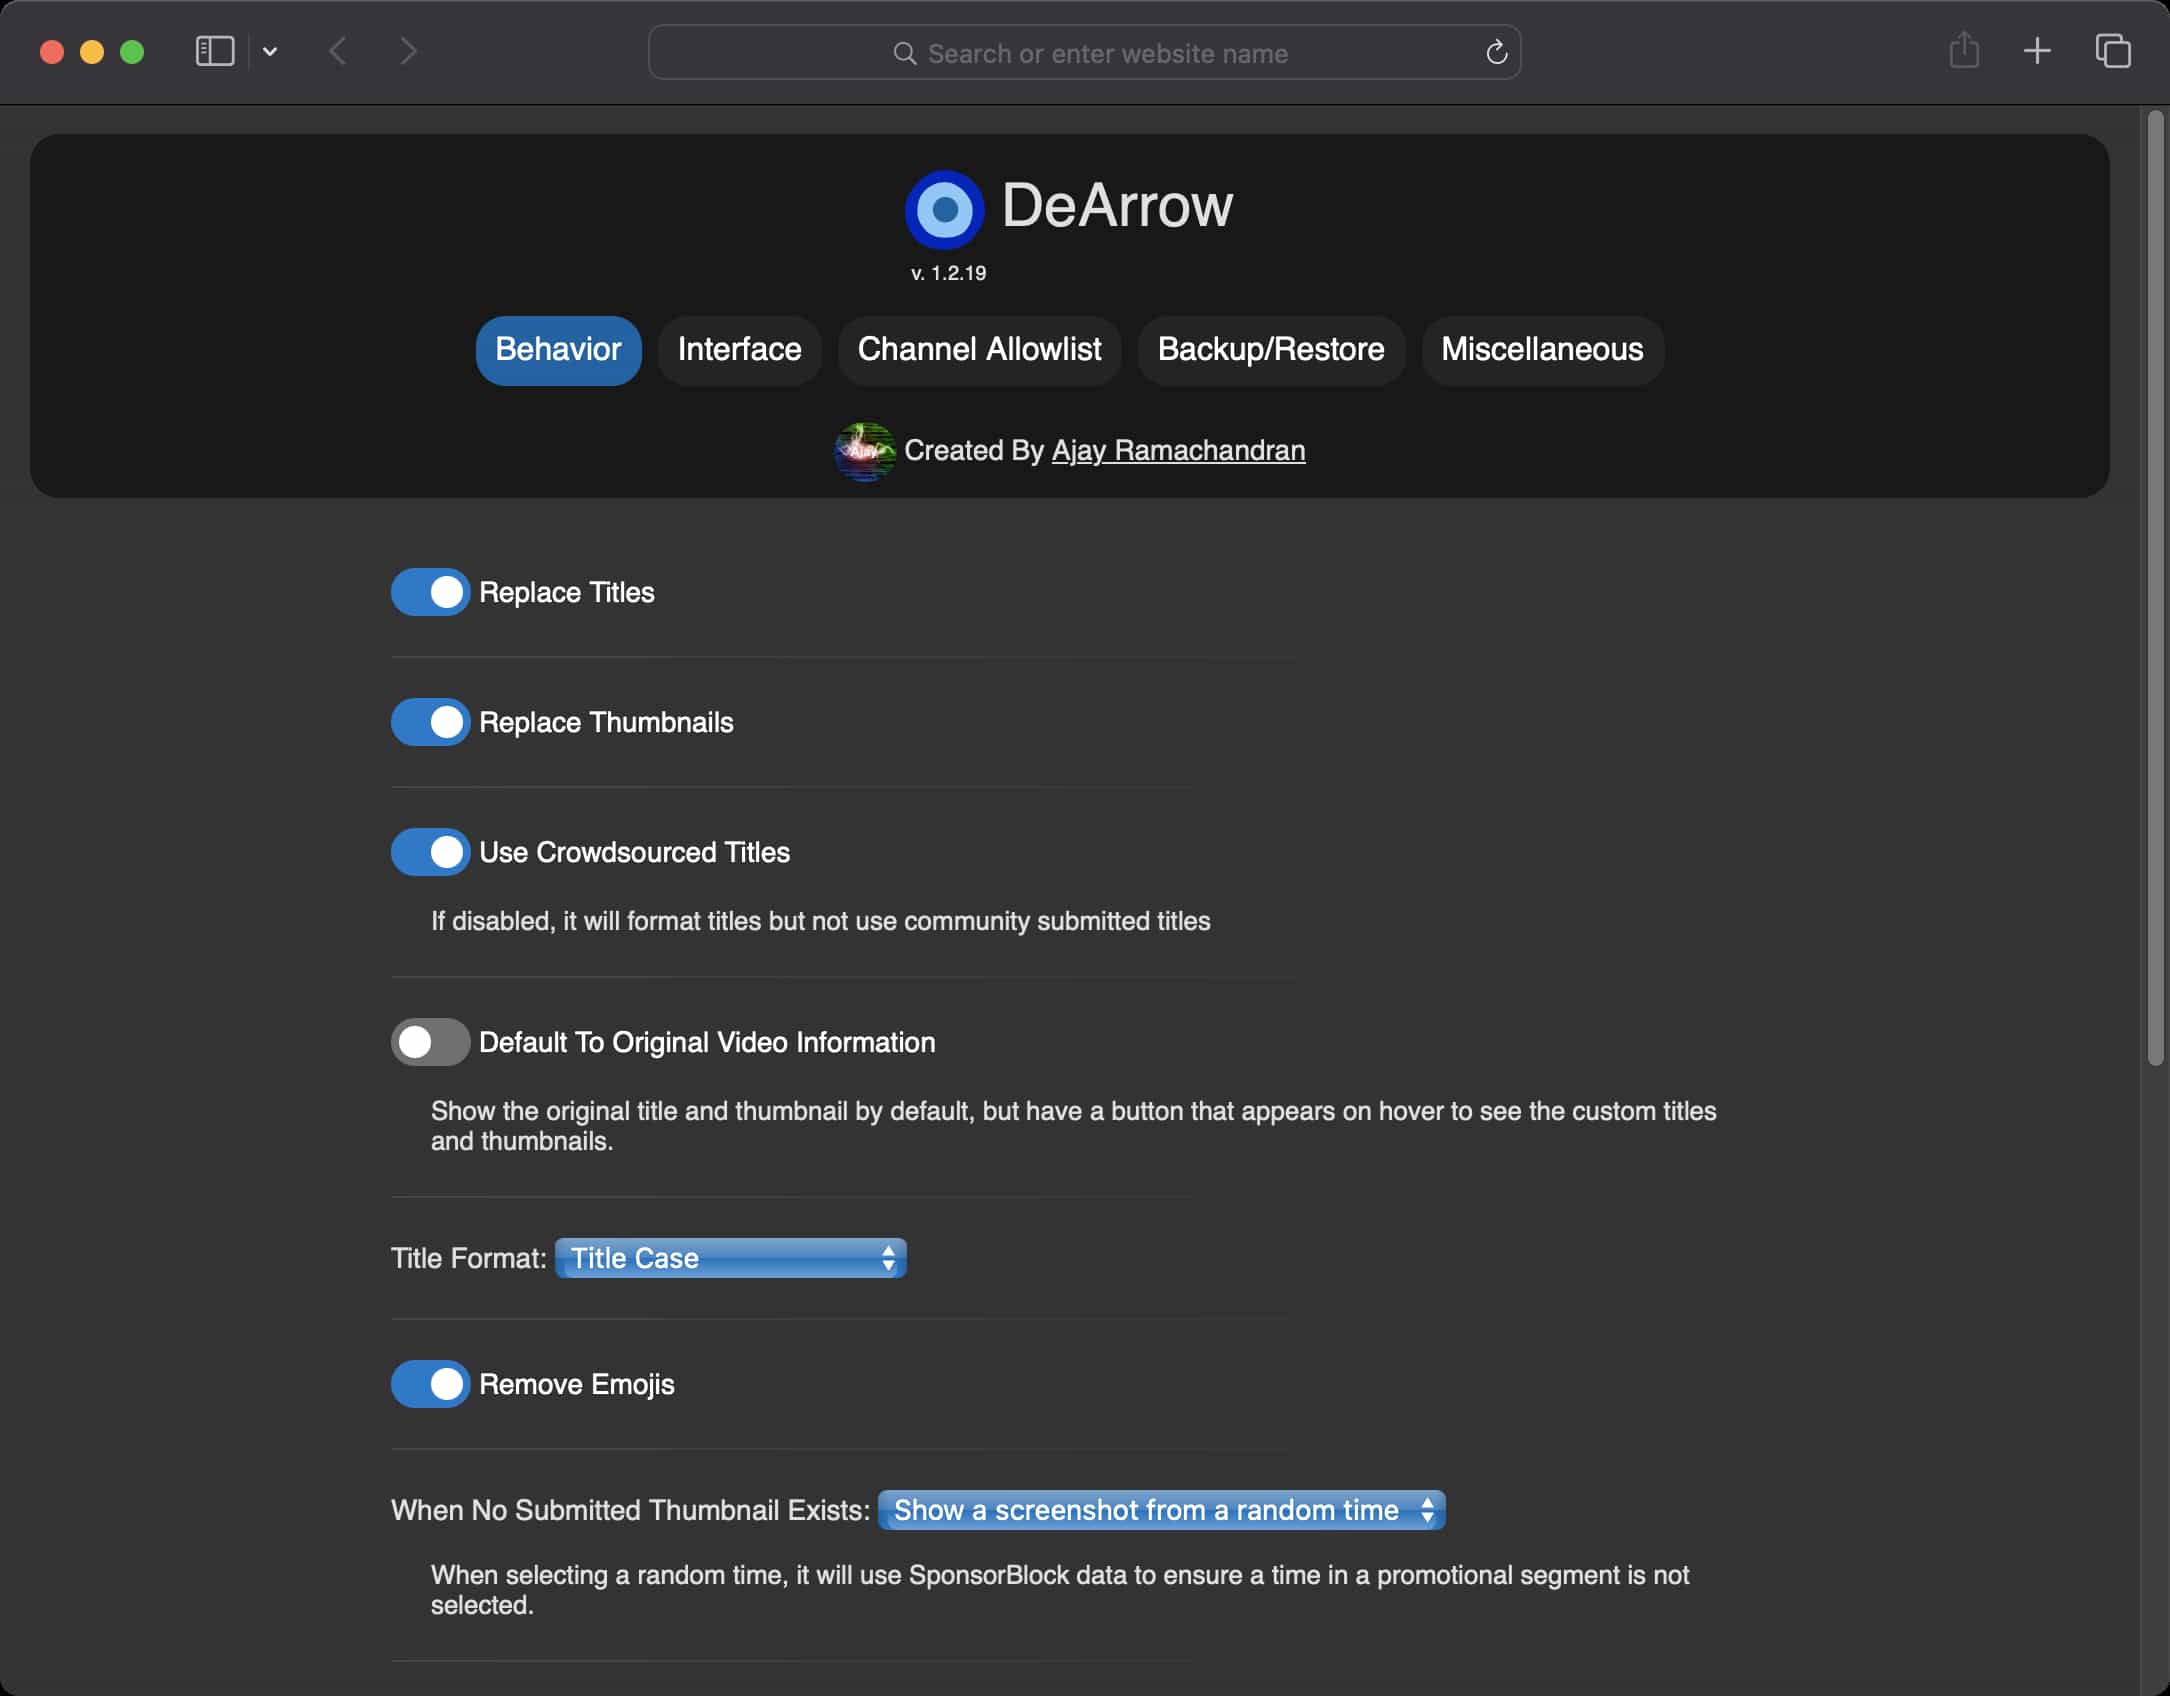 Screenshot of the DeArrow browser extension settings page with options to replace titles and thumbnails, use crowdsourced titles, and remove emojis